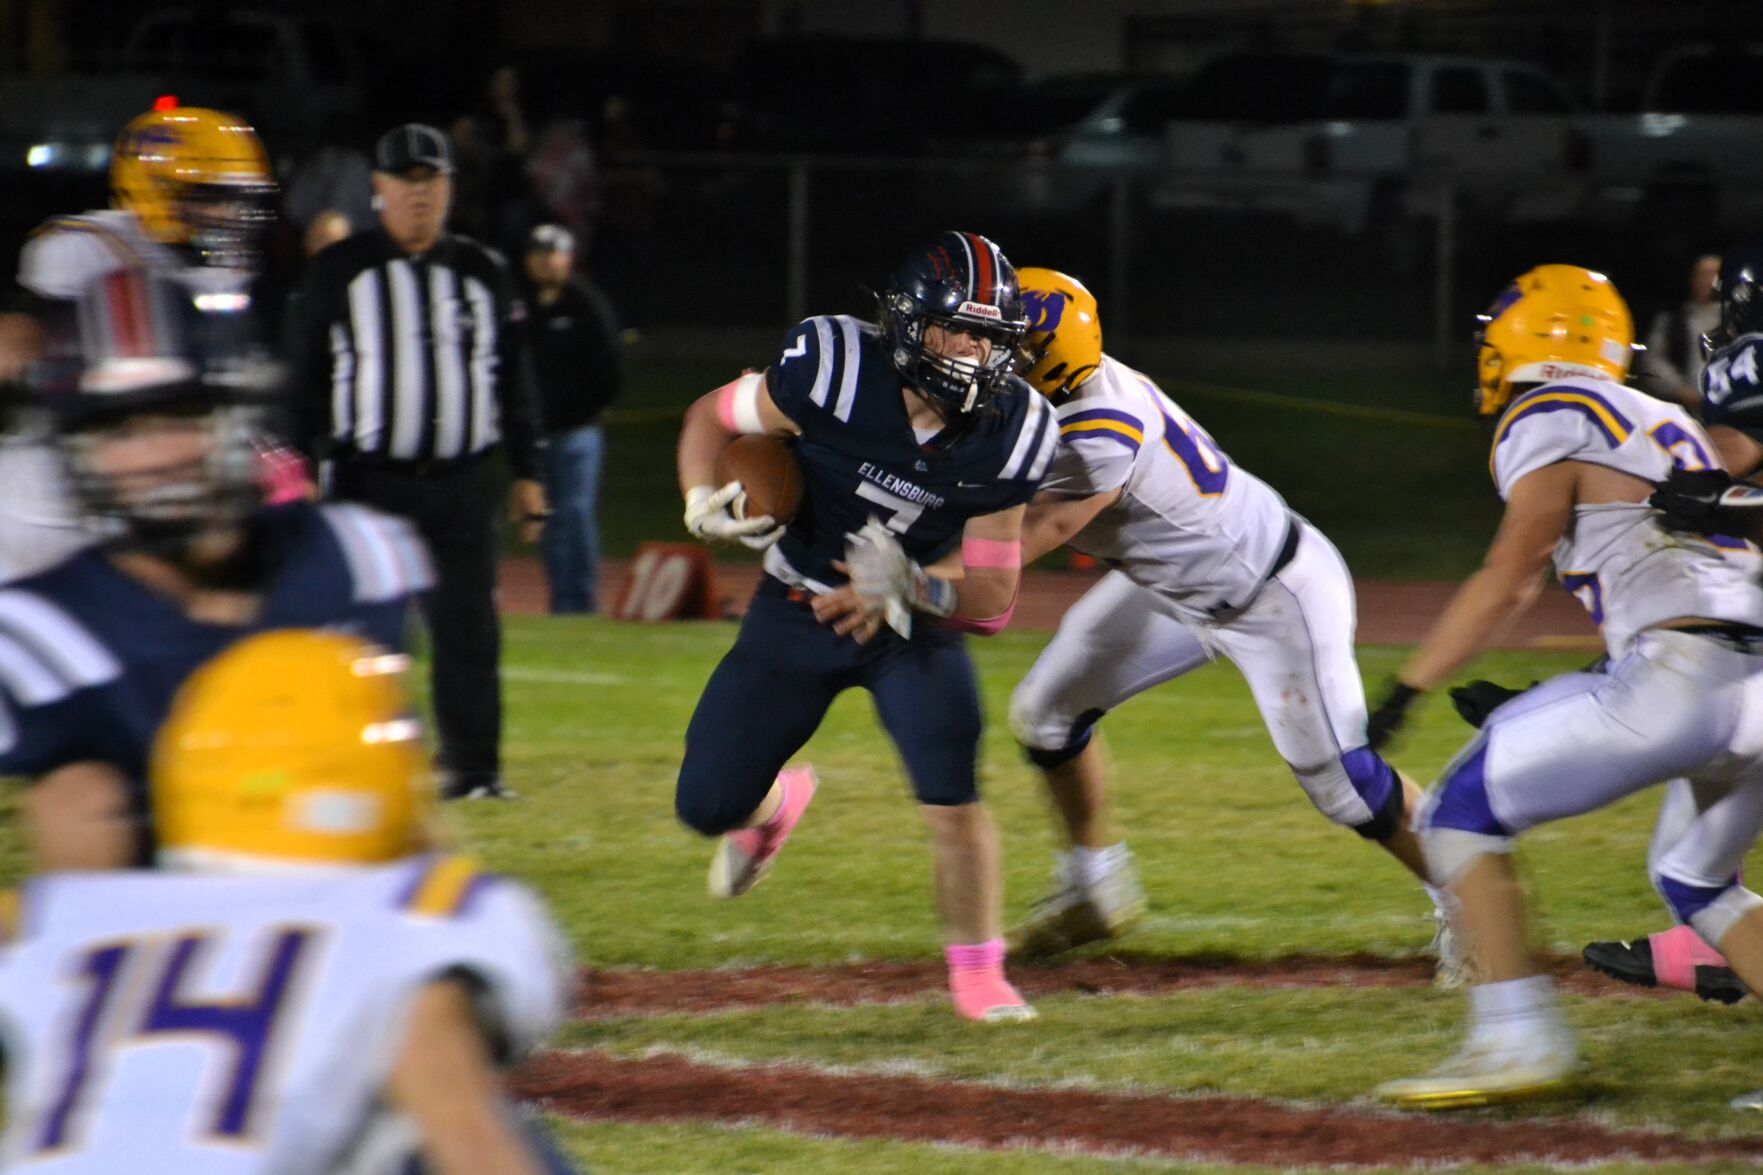 Prep roundup: Ellensburg football outmuscles No. 25 East Valley